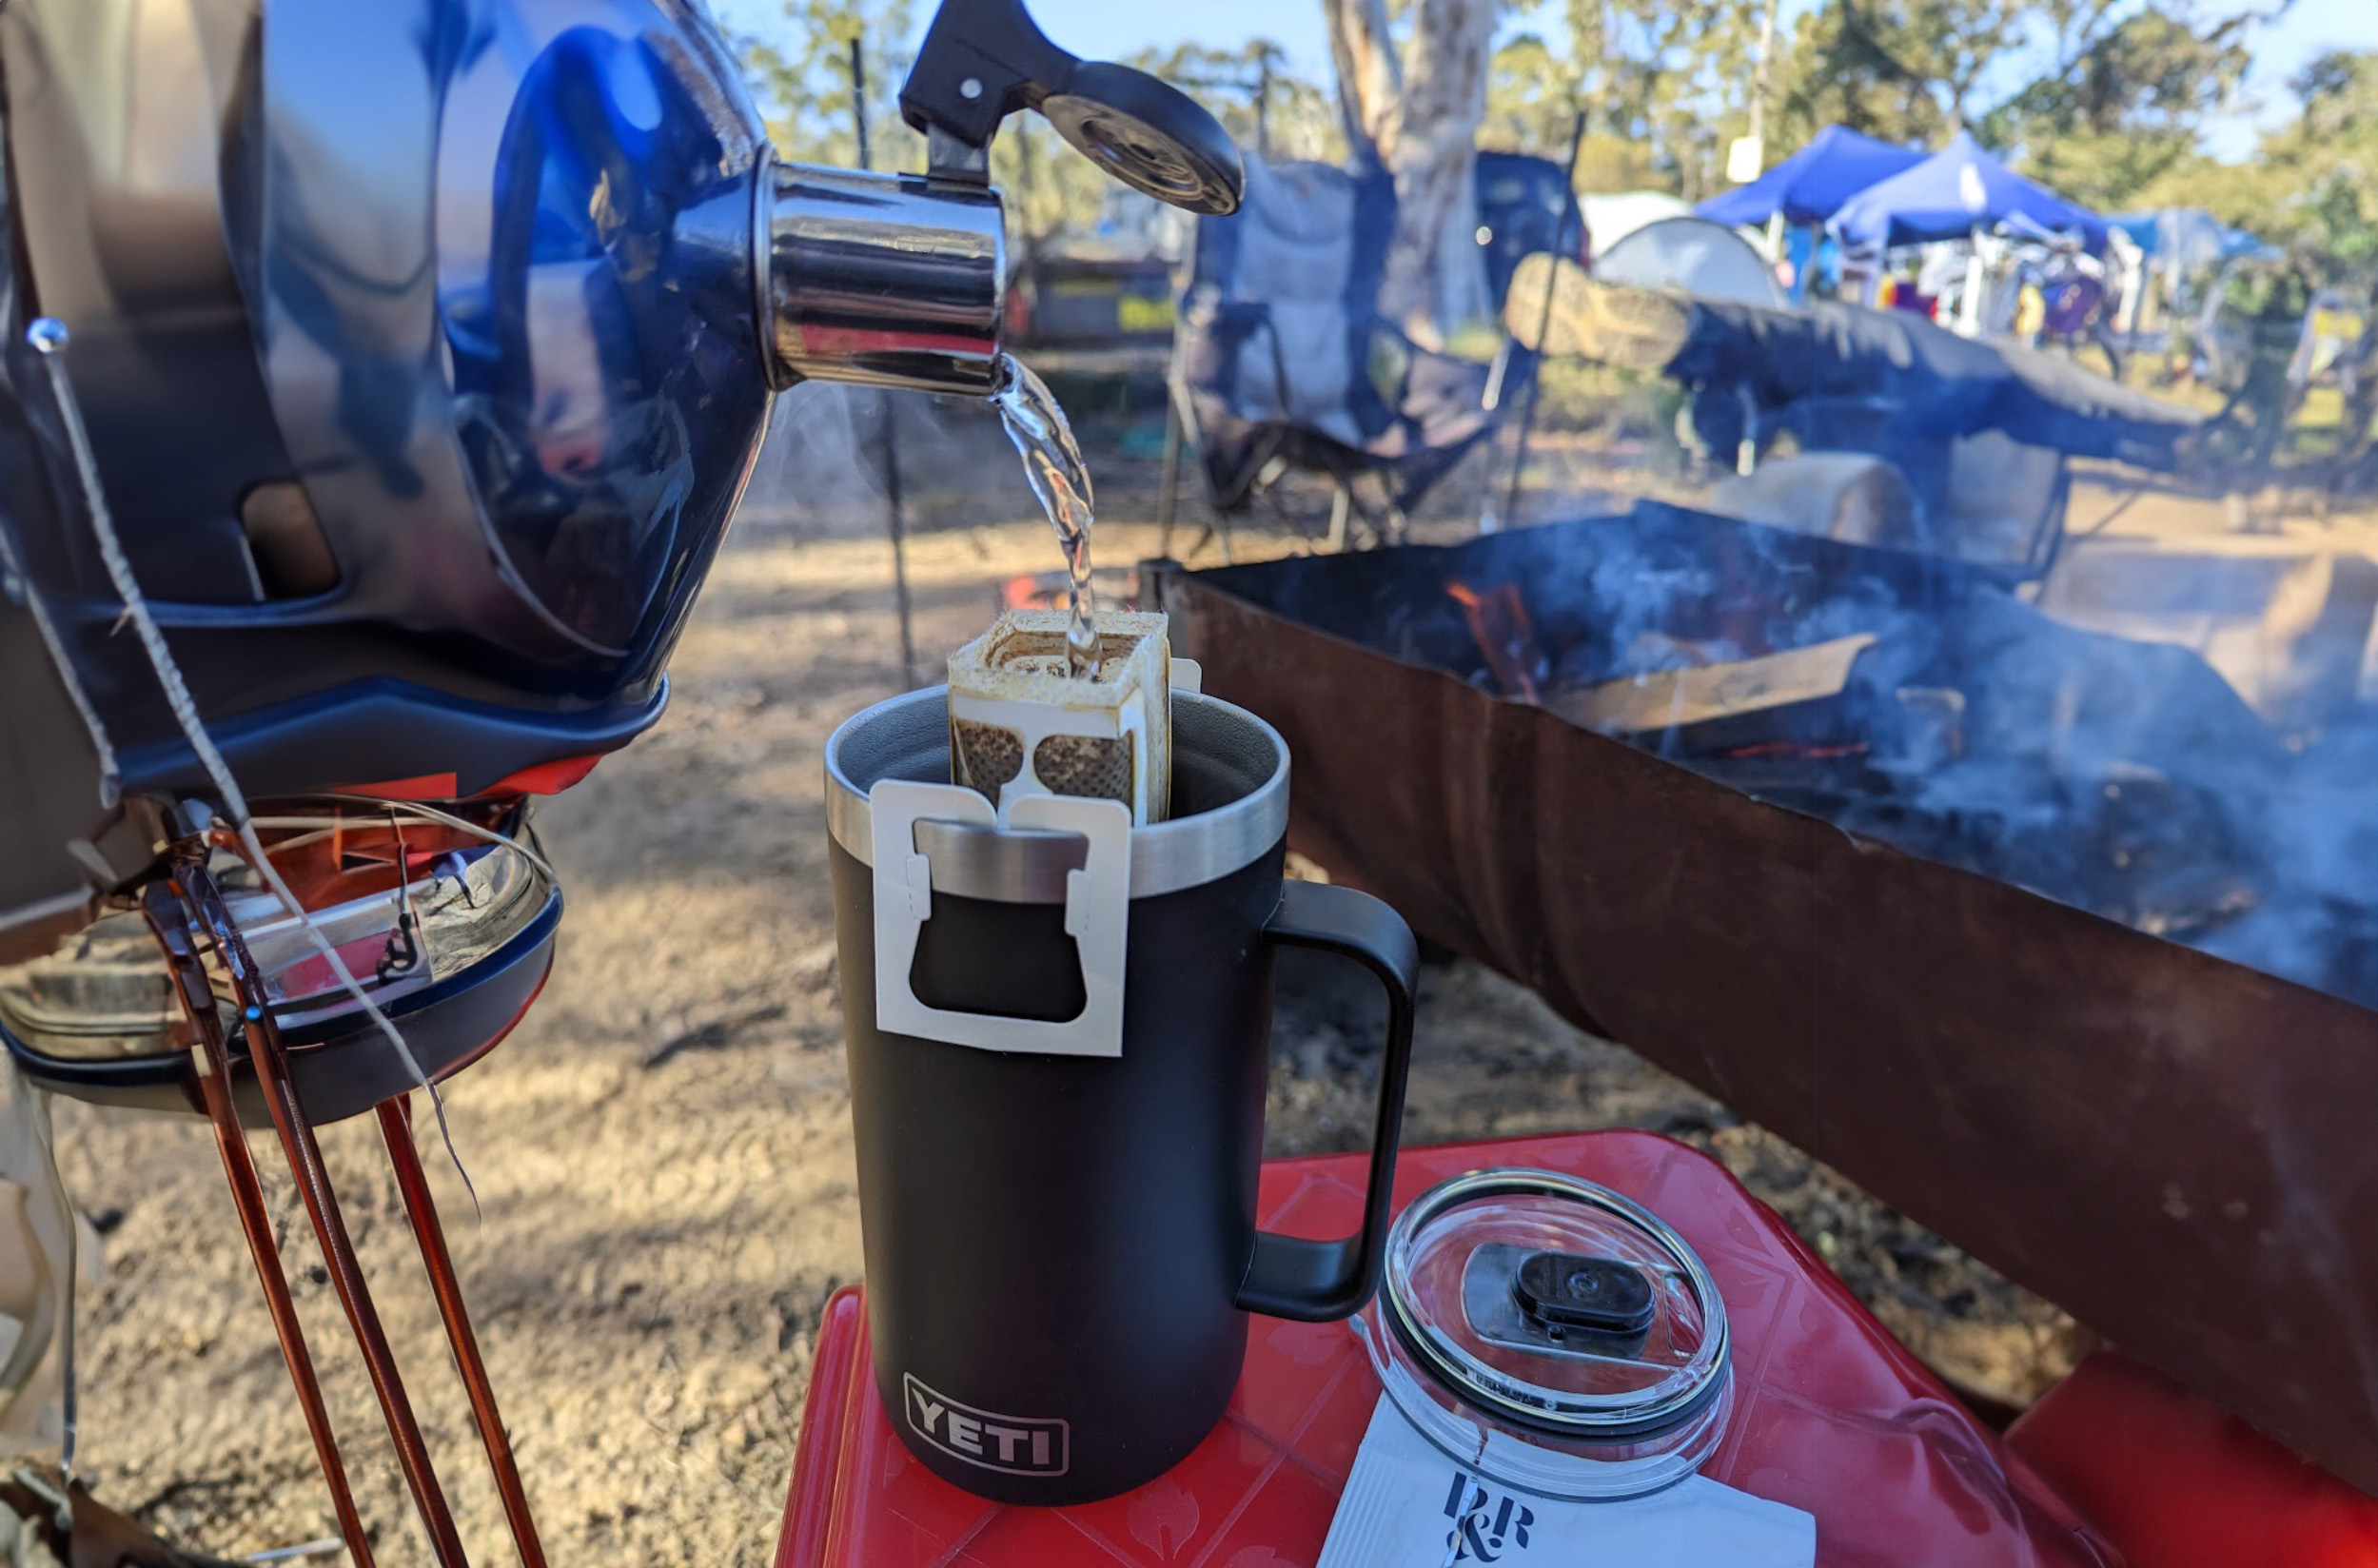 Great coffee while camping